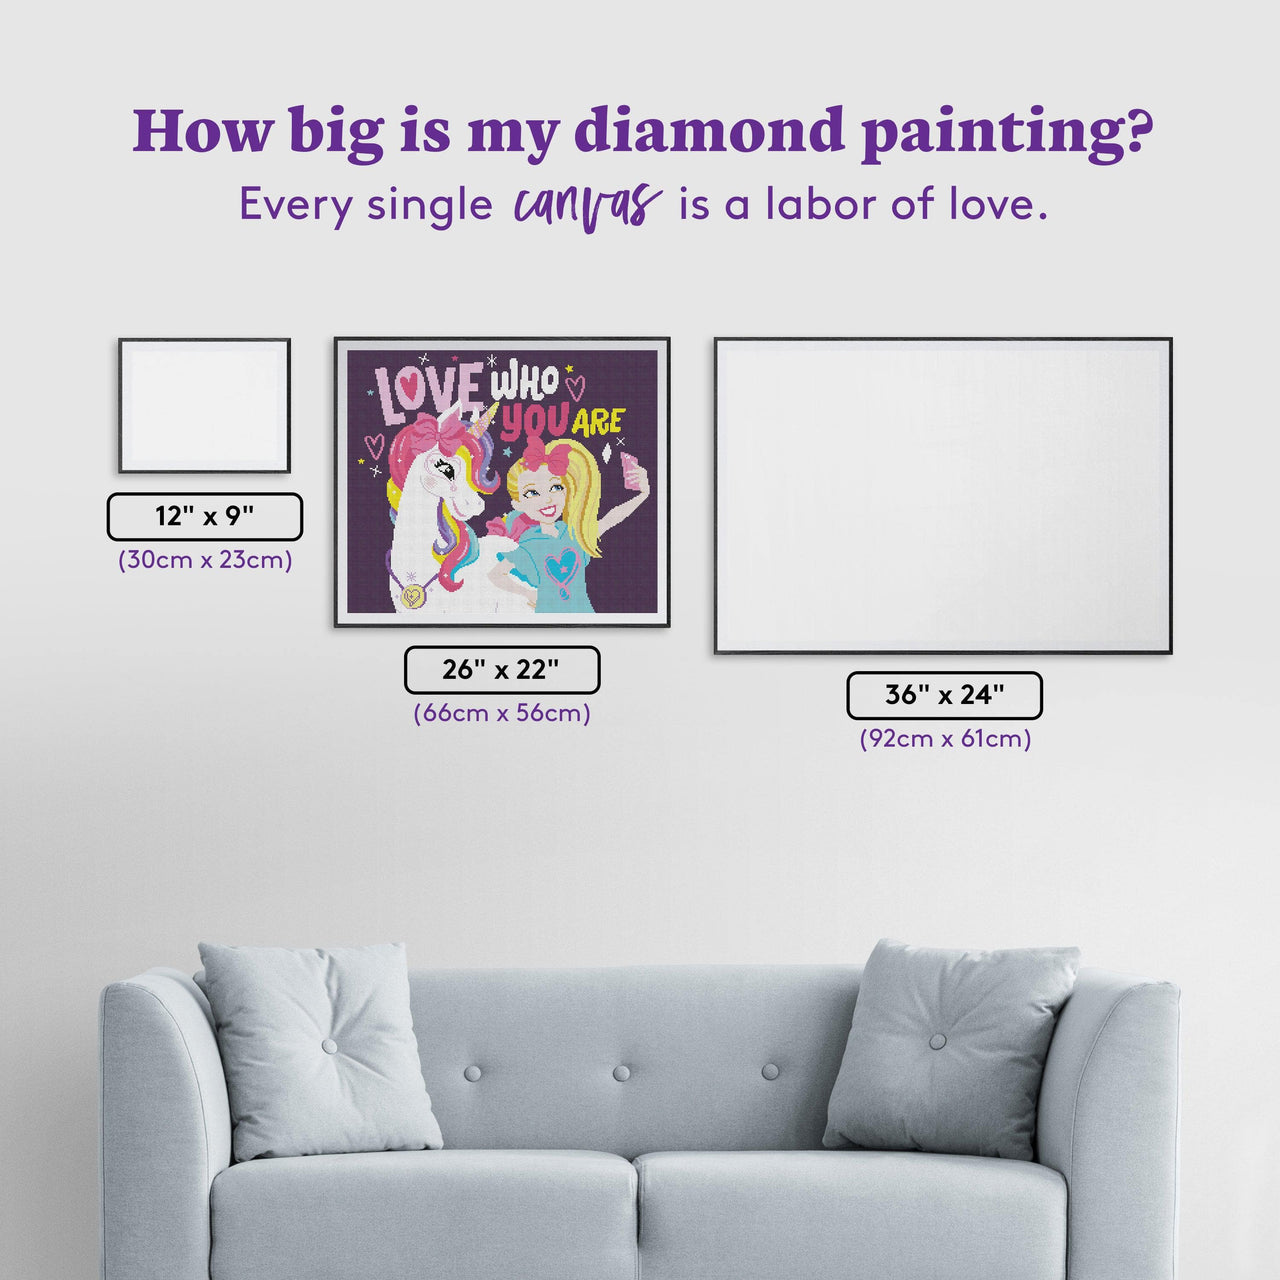 Diamond Painting Love Who You Are 26" x 22″ (66cm x 56cm) / Round with 29 Colors including 4 ABs / 46,765